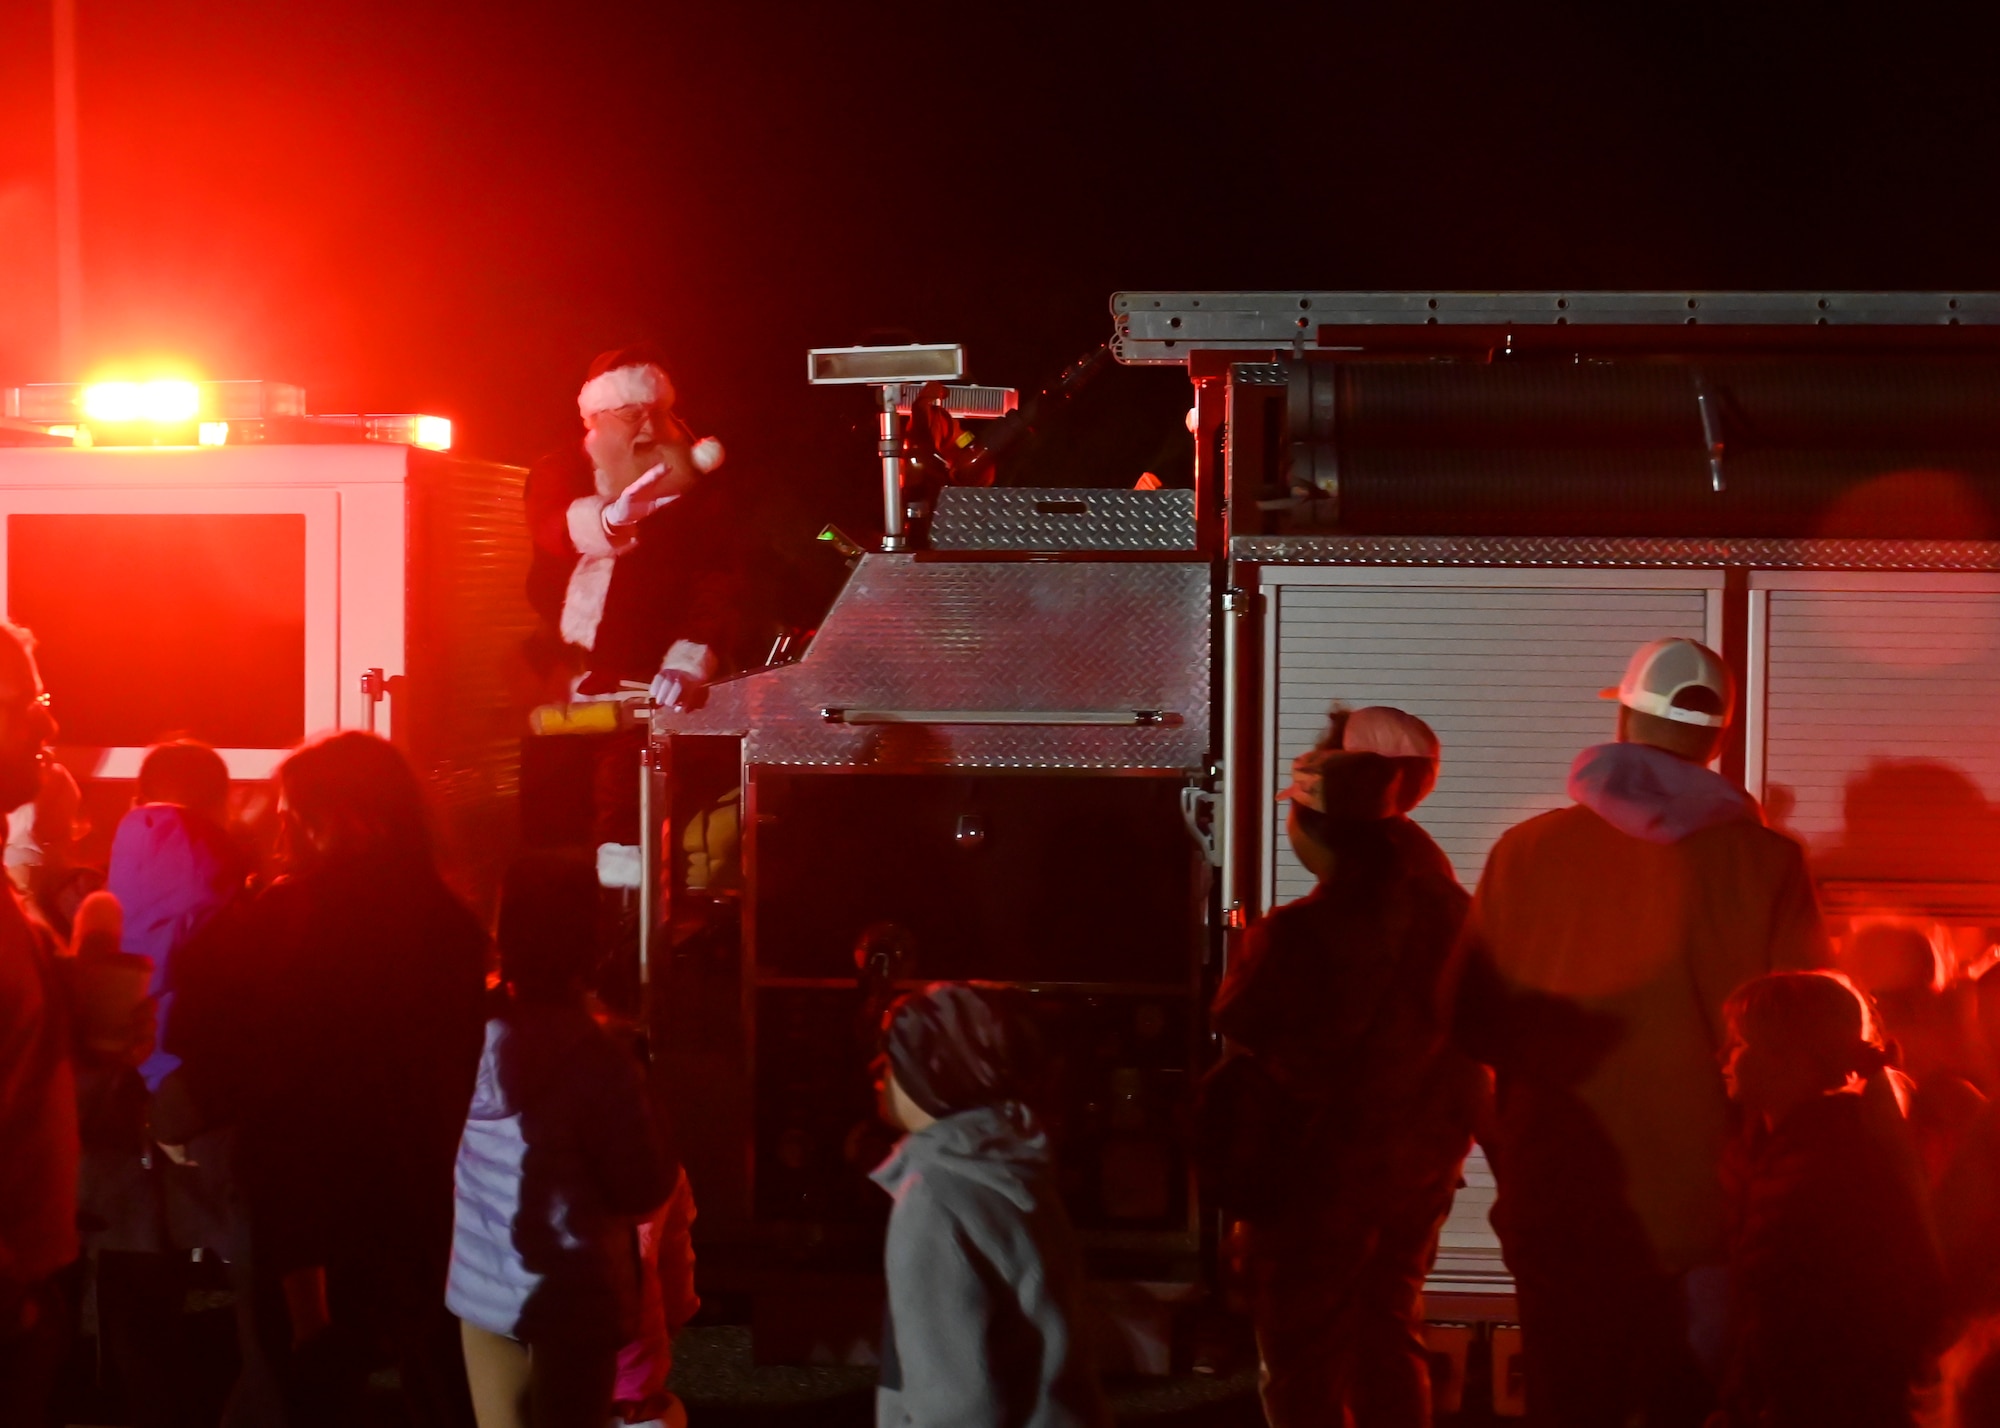 Santa Claus rides a fire truck next to a crowd of families.